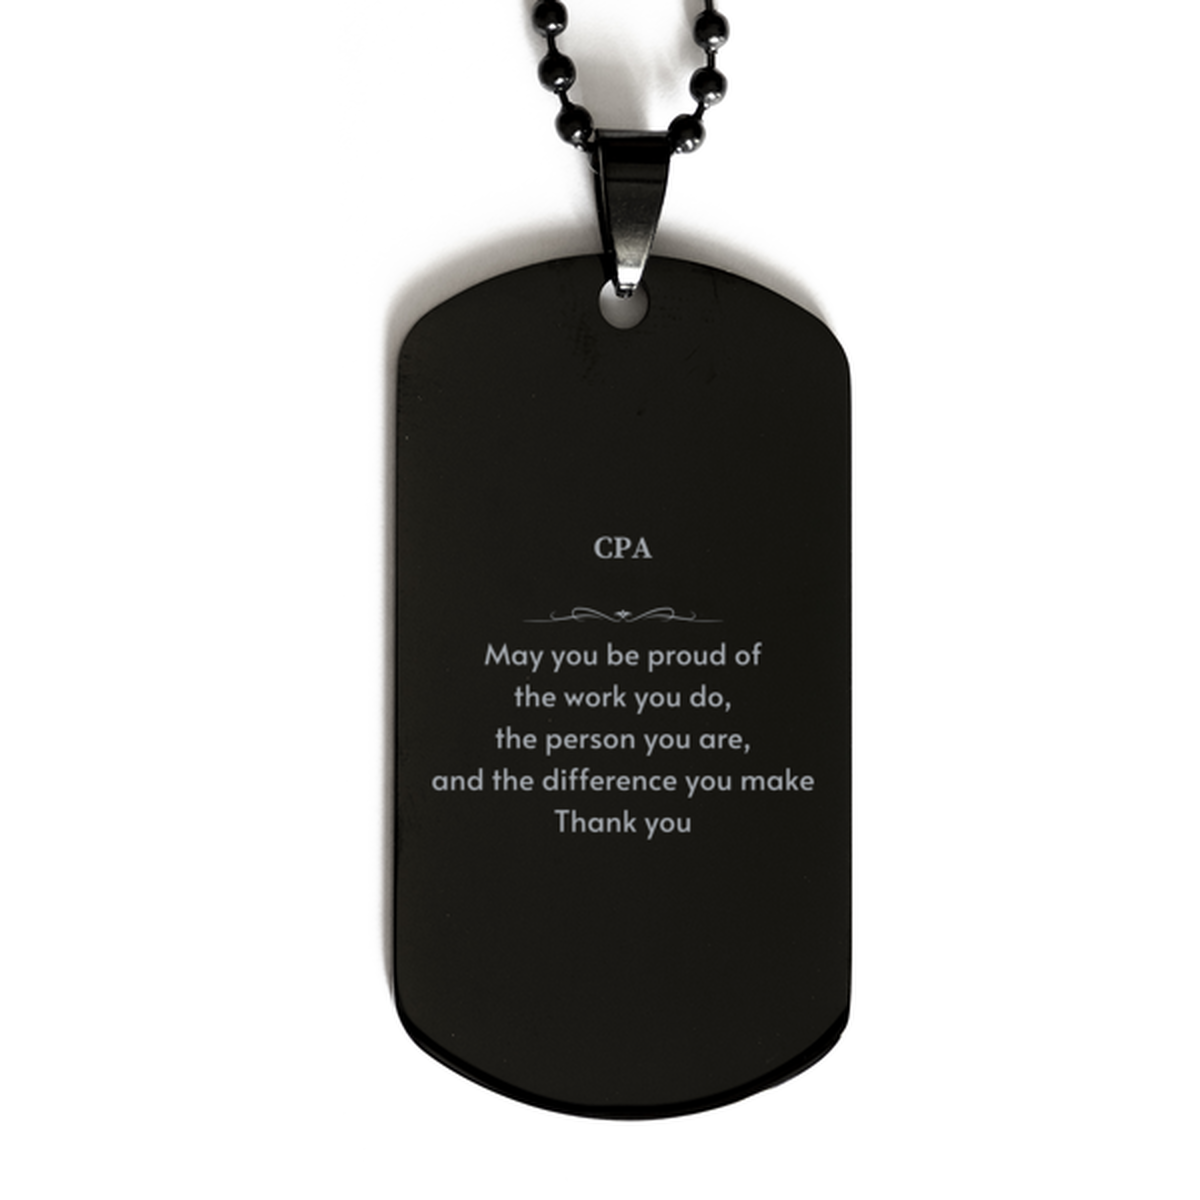 Heartwarming Black Dog Tag Retirement Coworkers Gifts for CPA, CPA May You be proud of the work you do, the person you are Gifts for Boss Men Women Friends